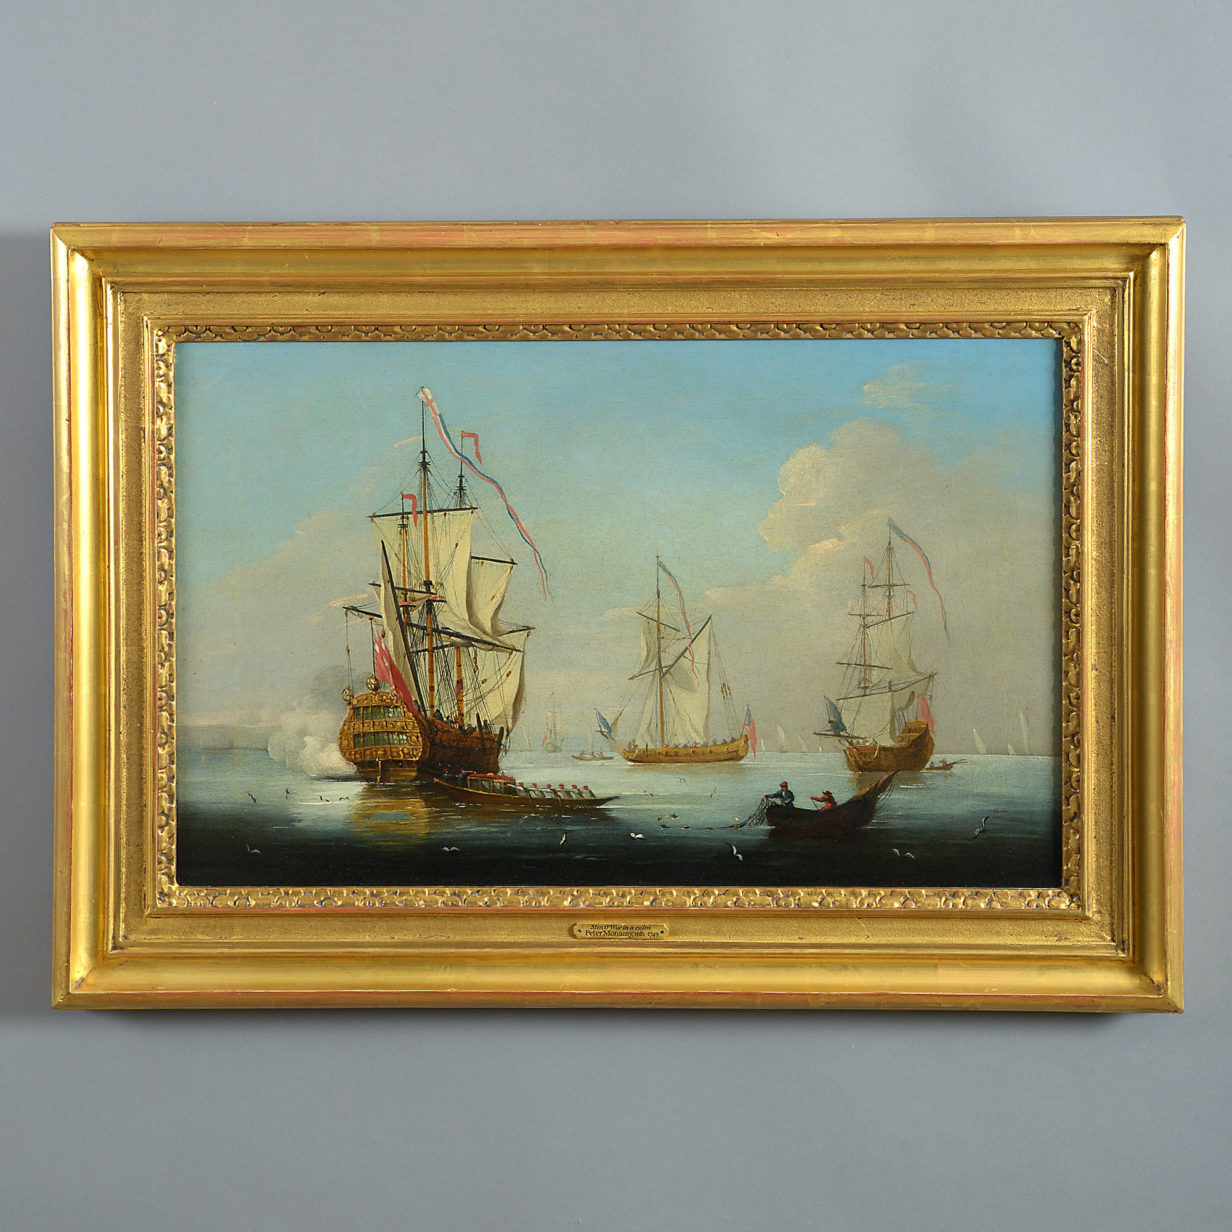 An 18th century english maritime scene - a warship firing a salute, attributed to peter monamy